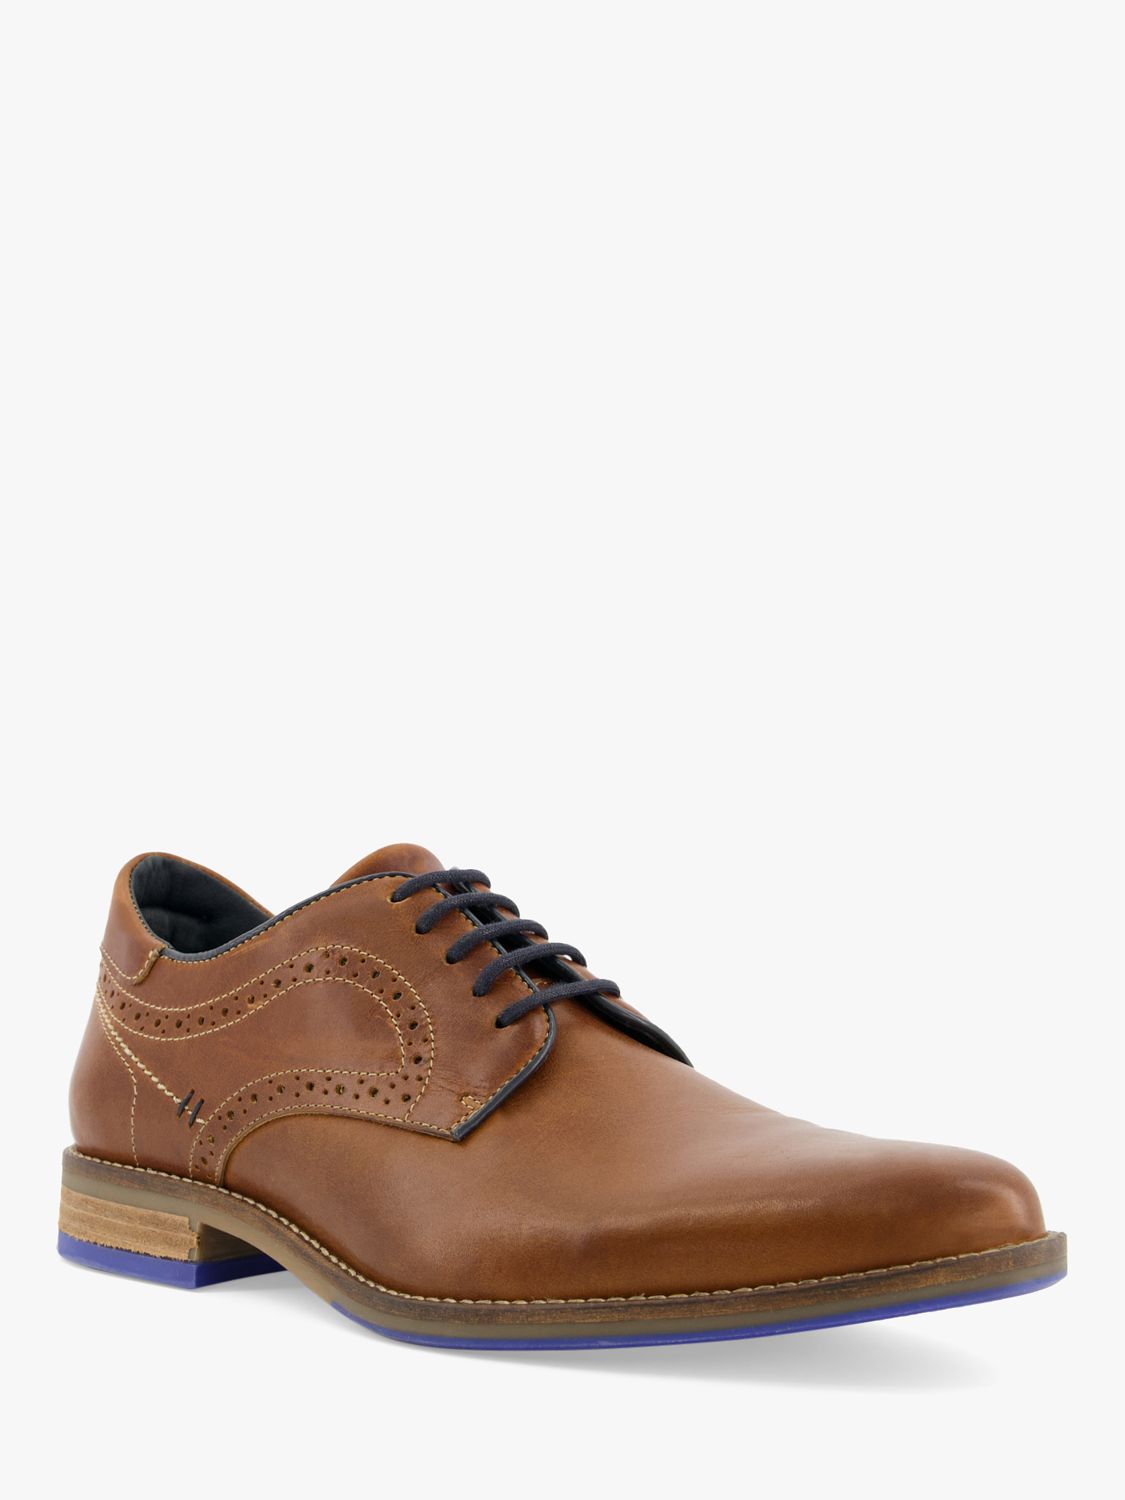 Dune Wide Fit Bintom Leather Stitch Detail Derby Shoes, Tan at John ...